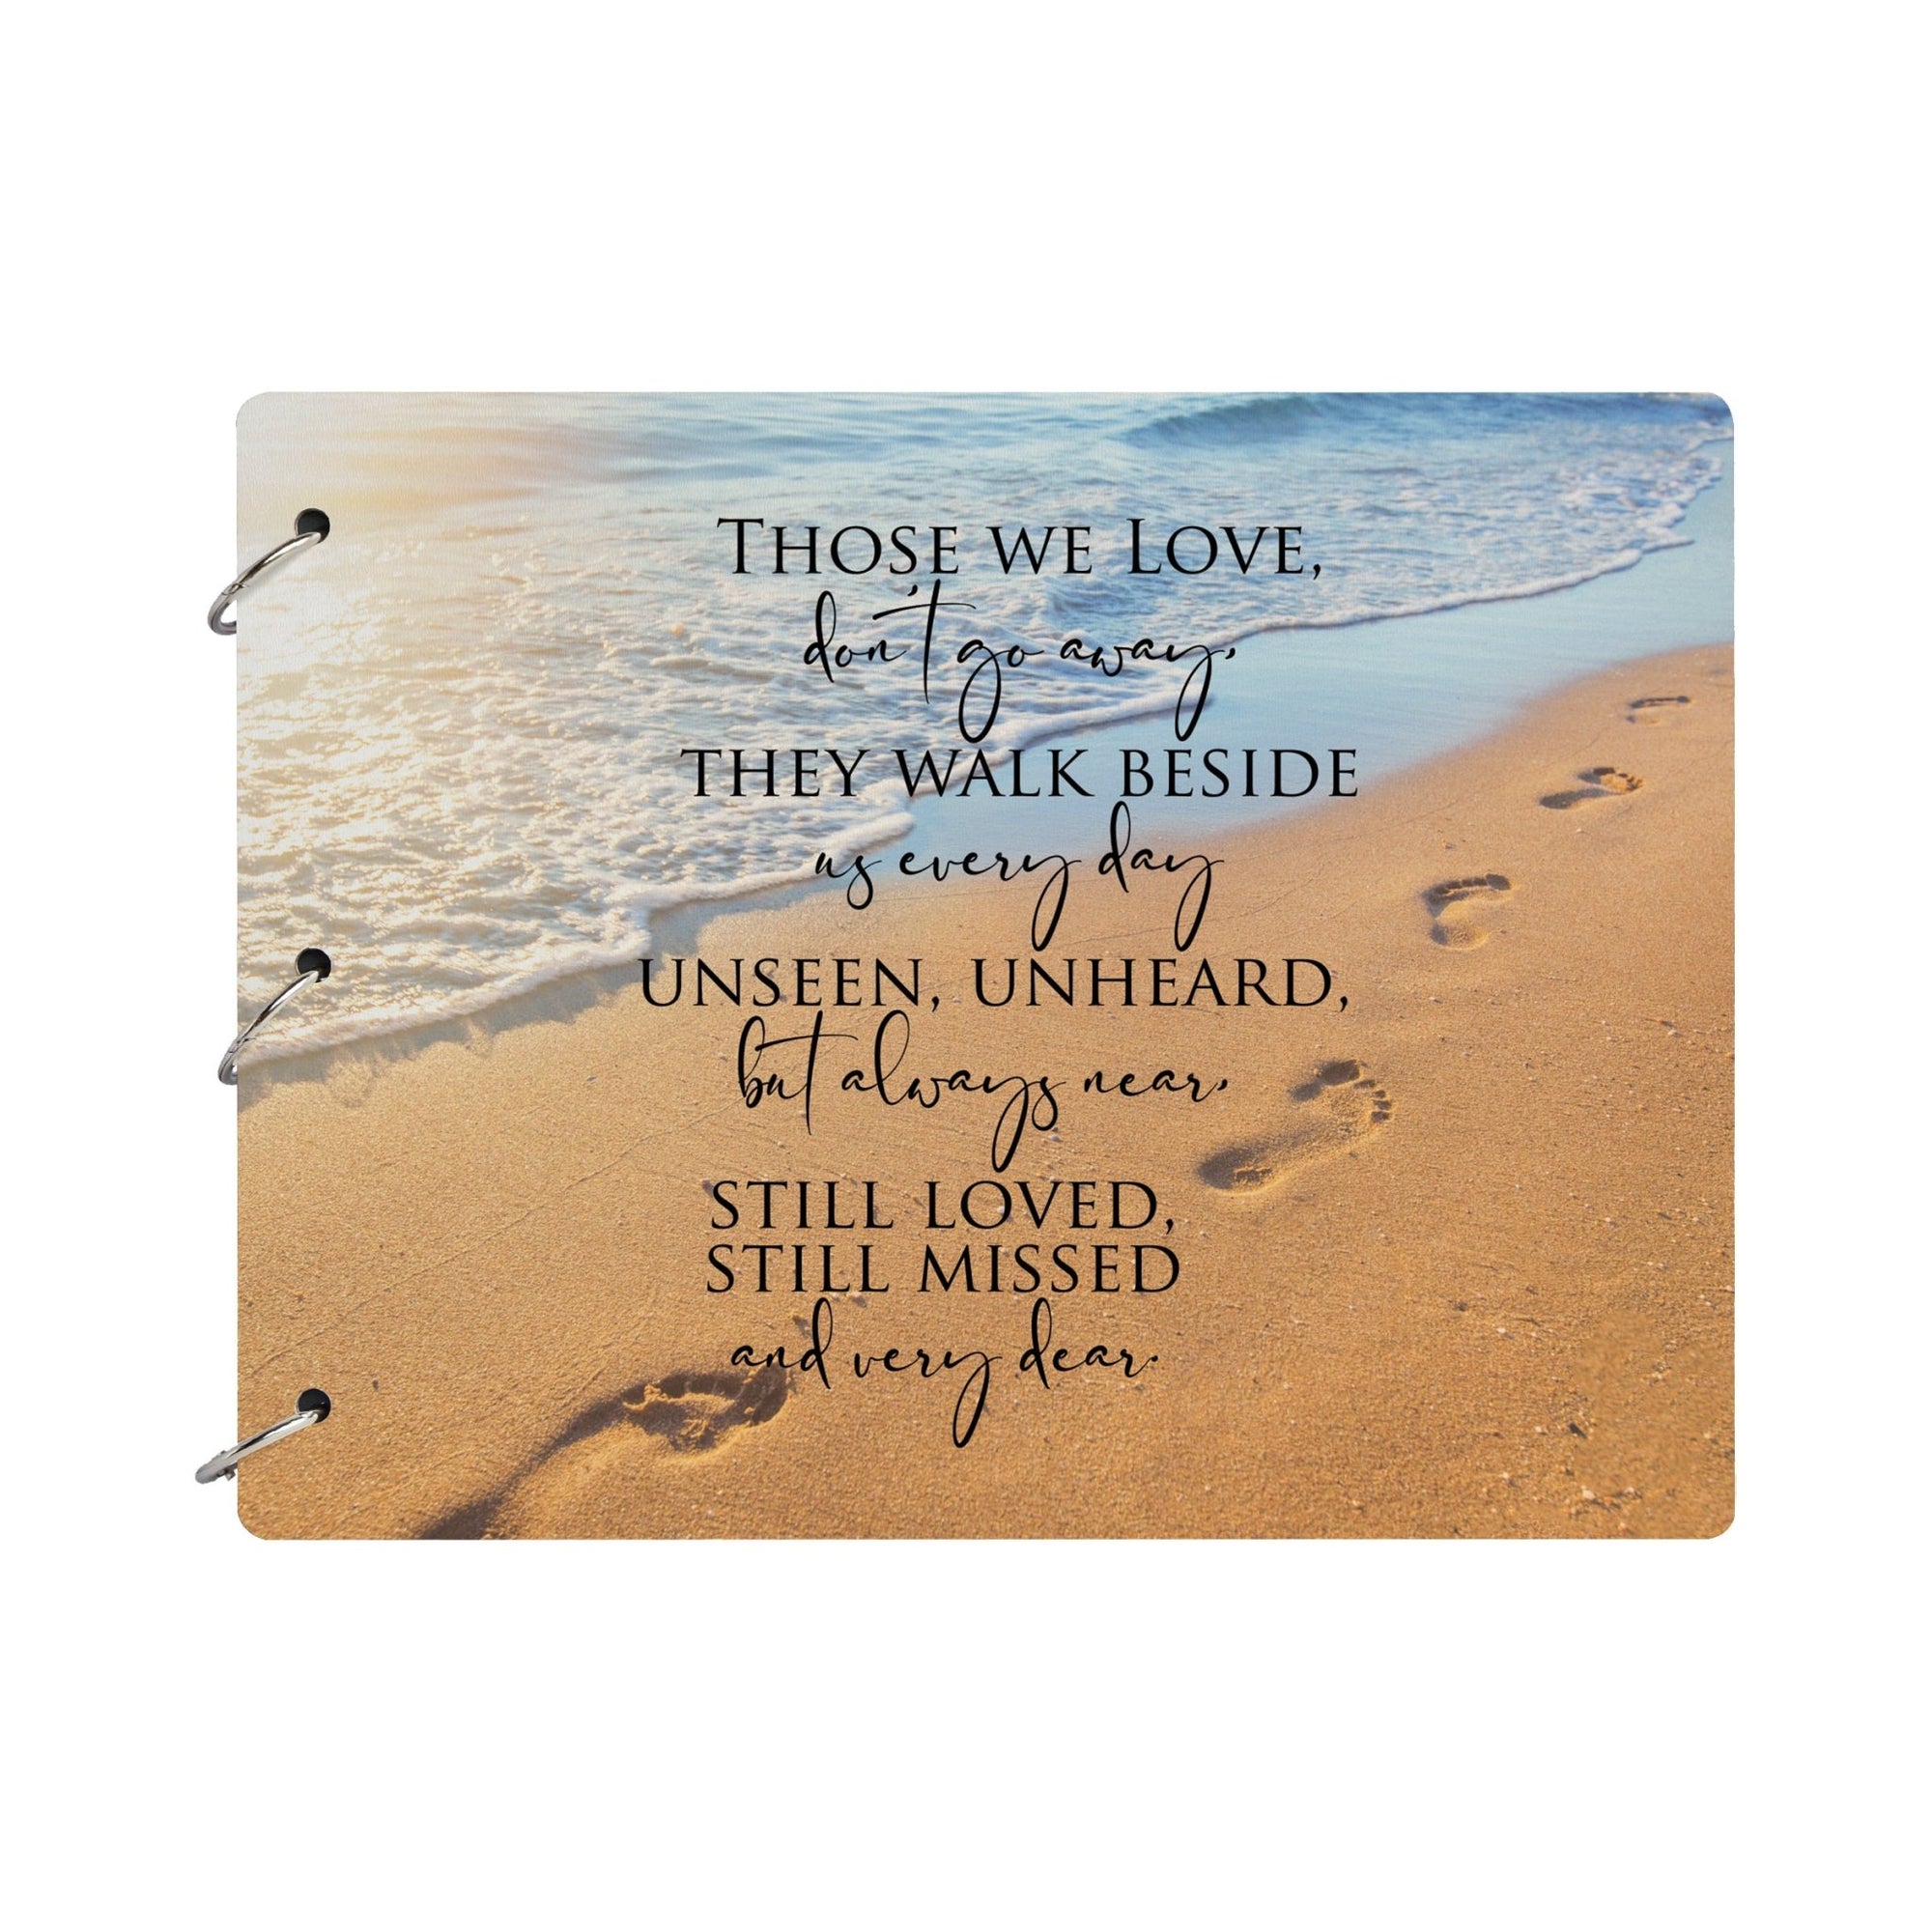 Celebration Of Life Funeral Guest Books For Memorial Services Registry With Wooden Cover - Those We Love - LifeSong Milestones